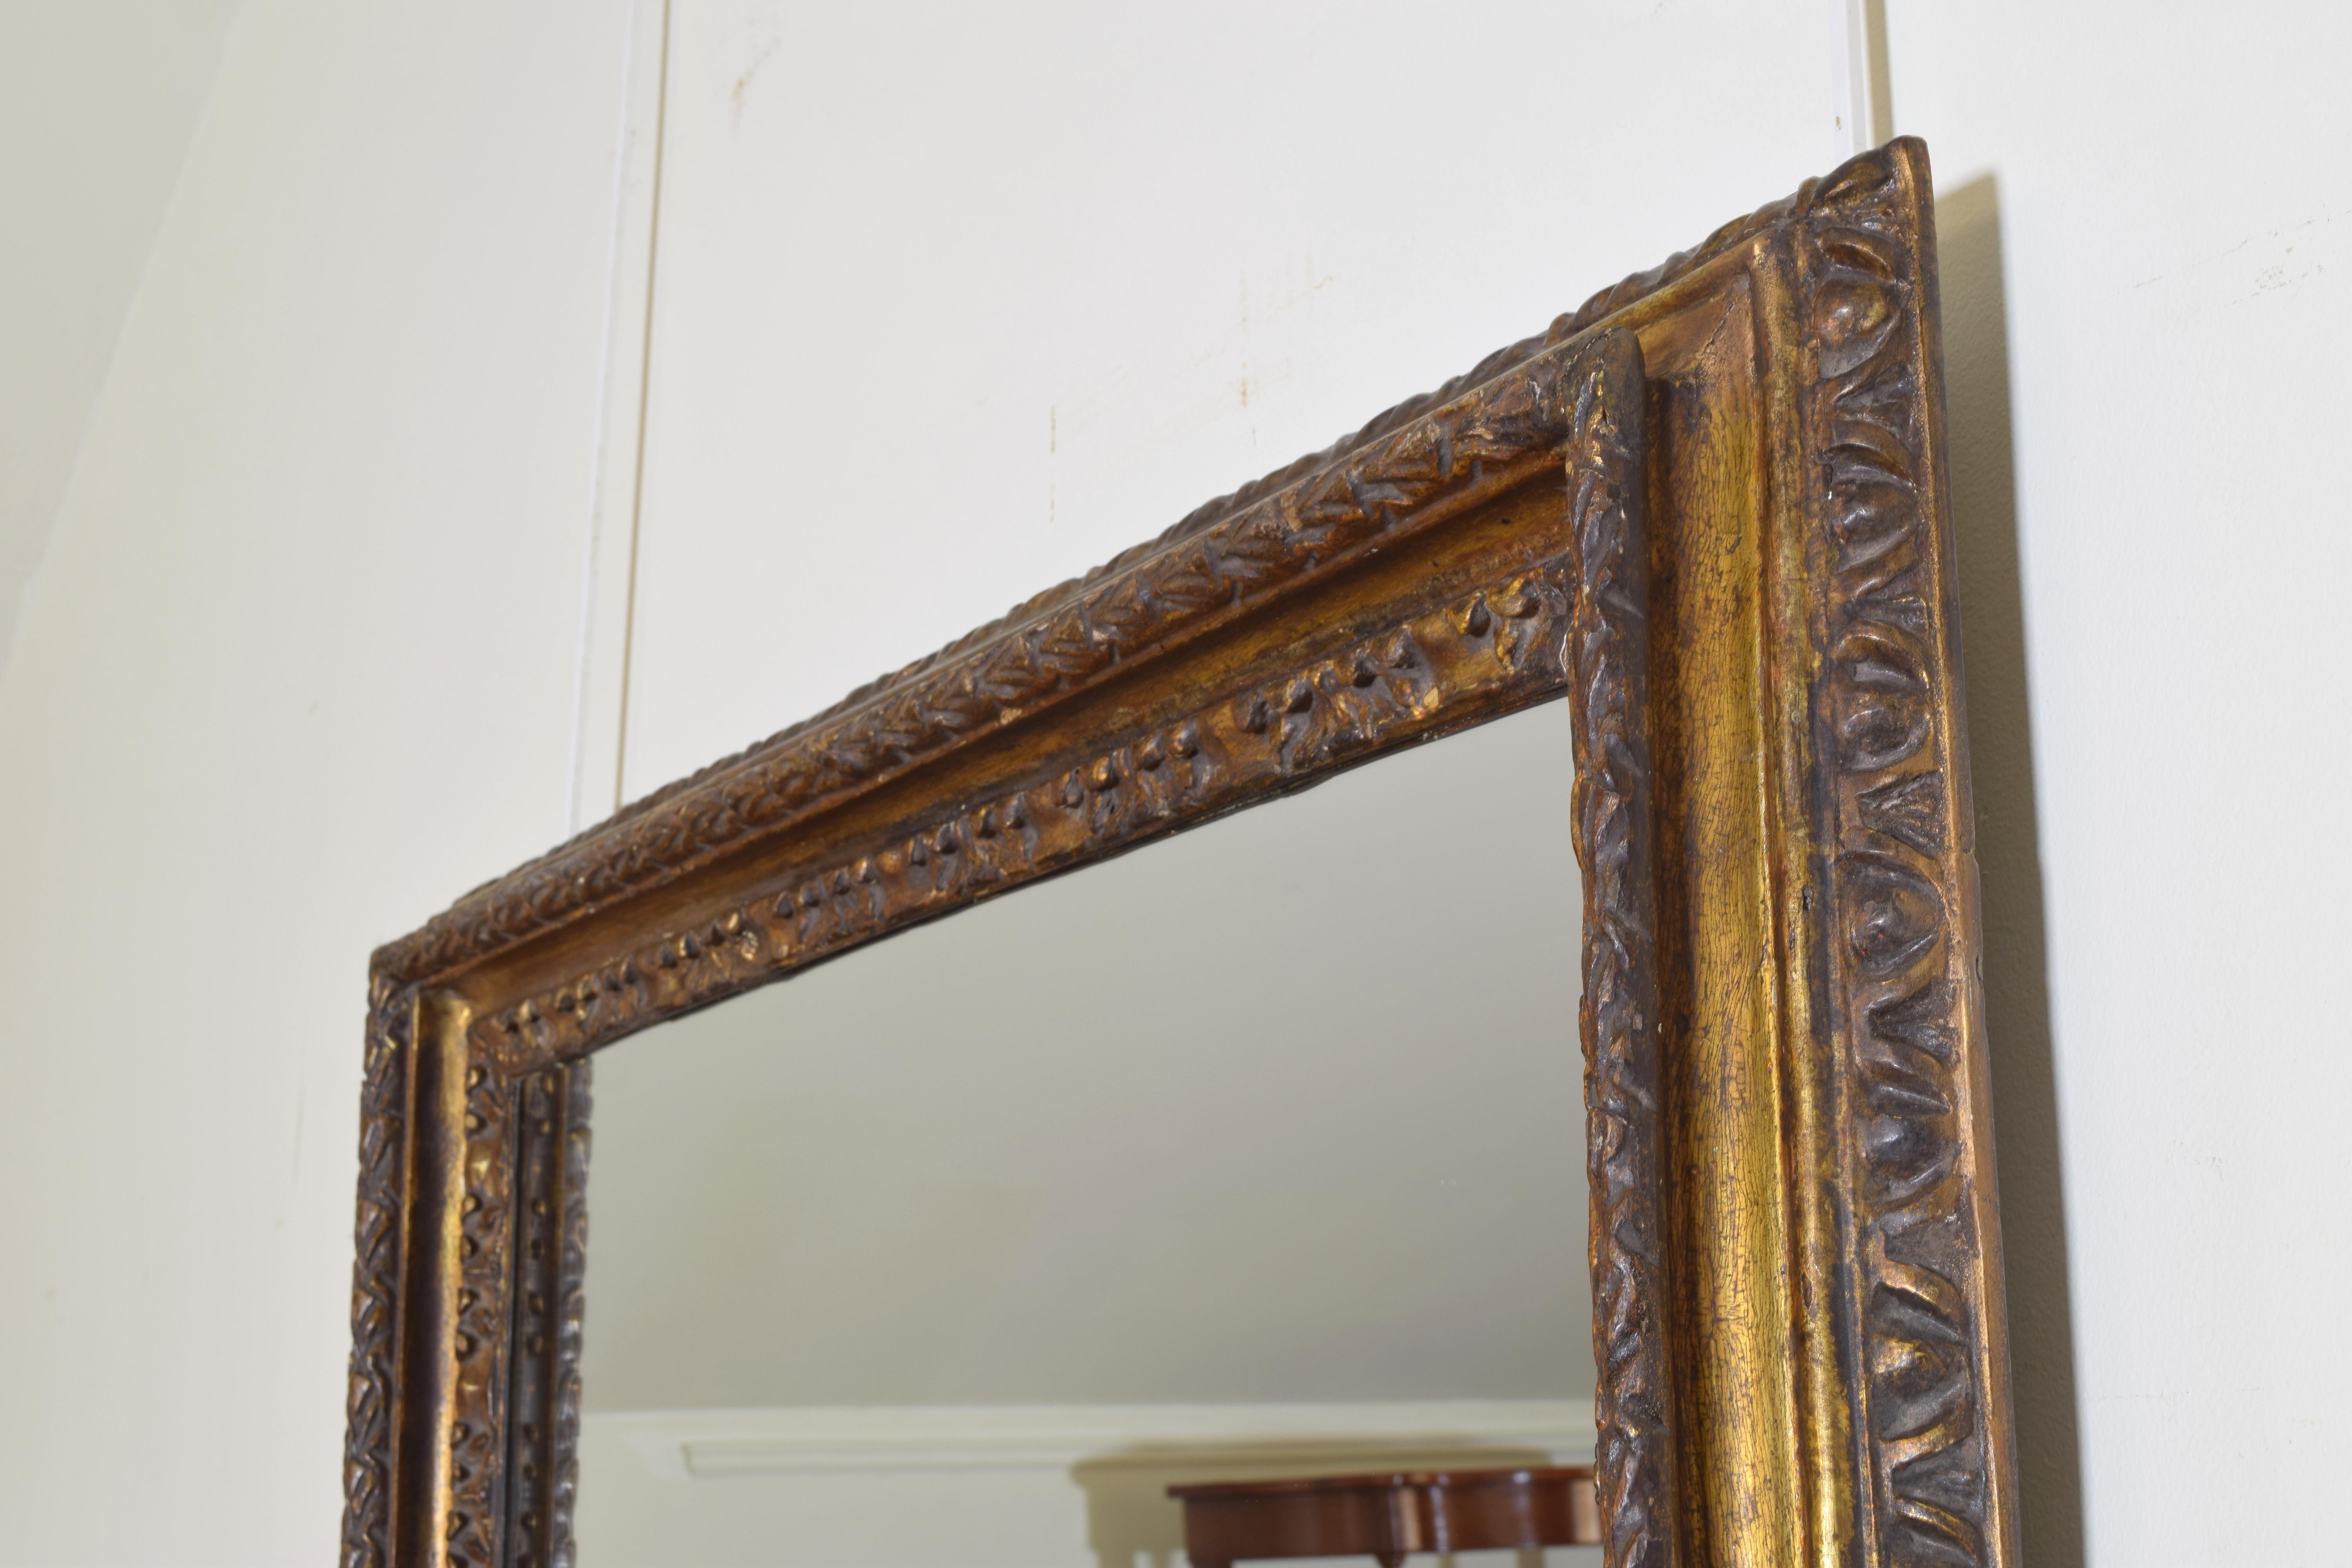 Hand-Carved Italian Carved Giltwood Wall Mirror from the Early 18th Century